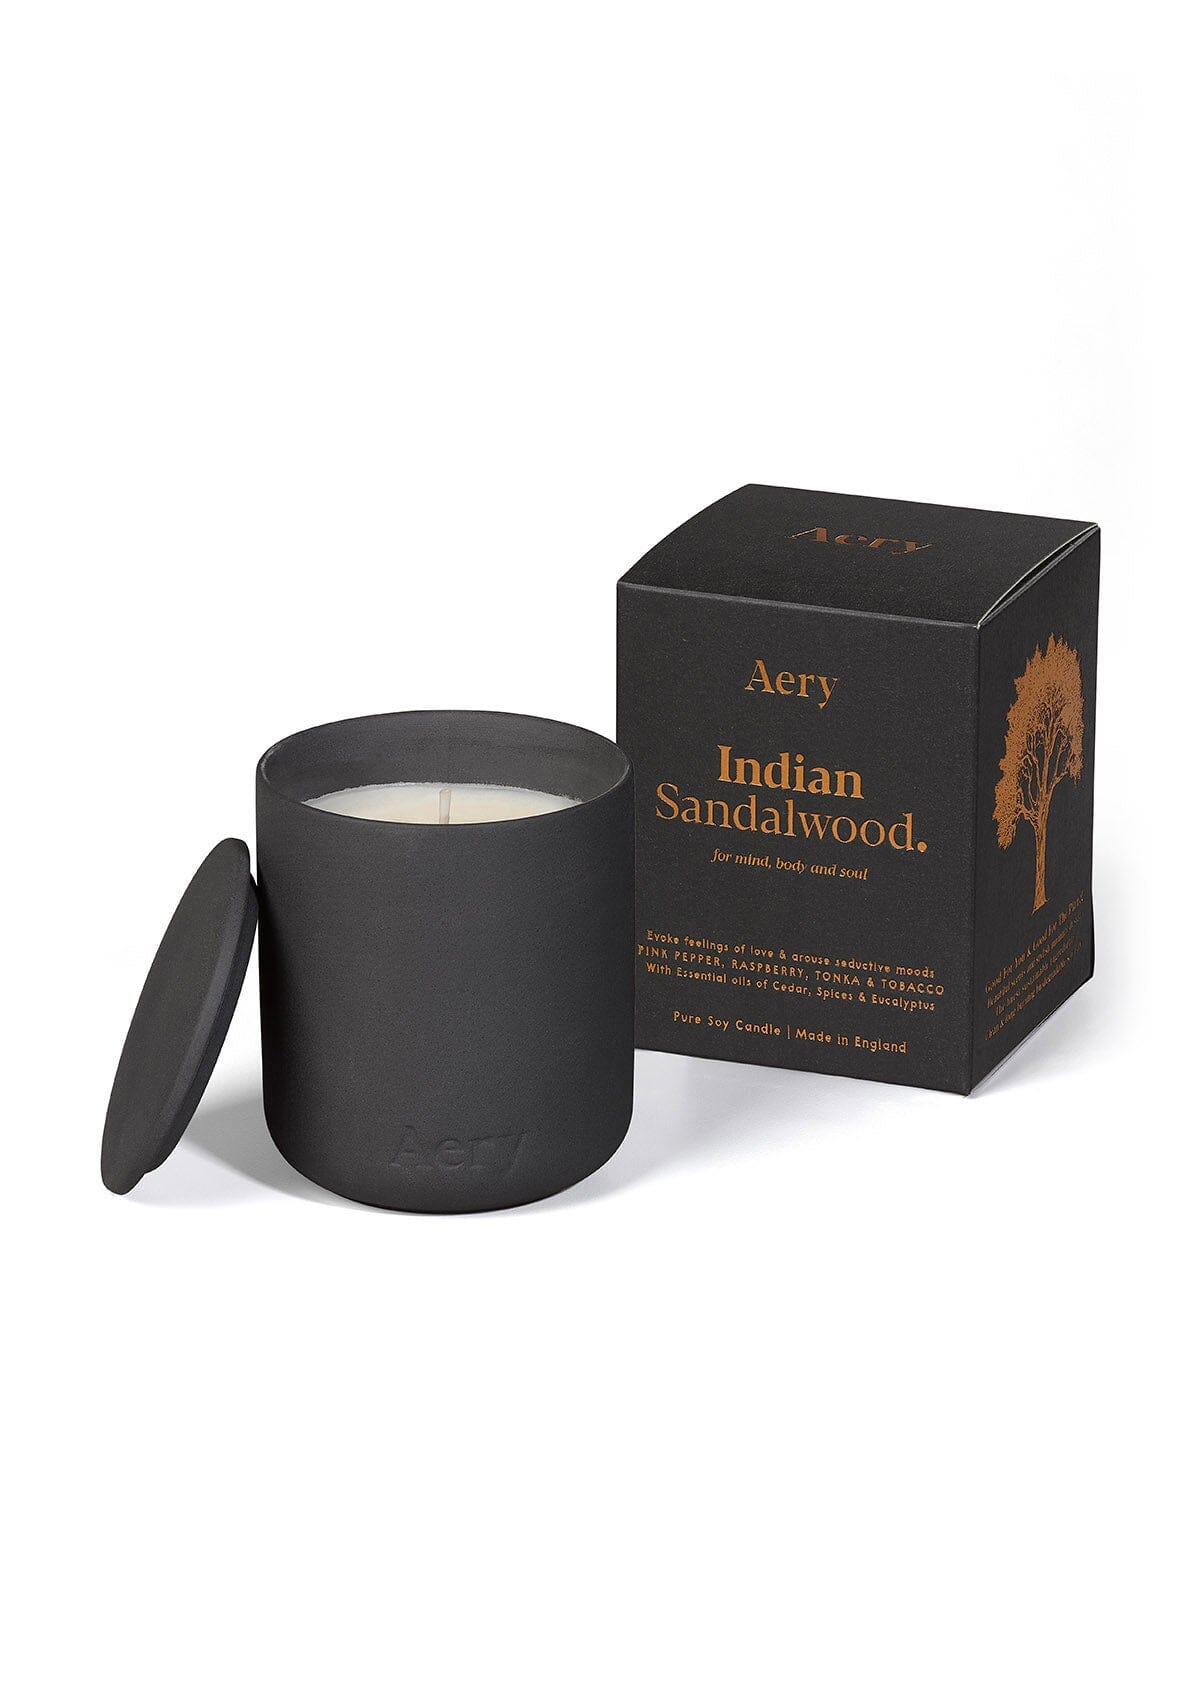 Black Indian Sandalwood ceramic scented candle displayed next to product packaging by Aery on white background 